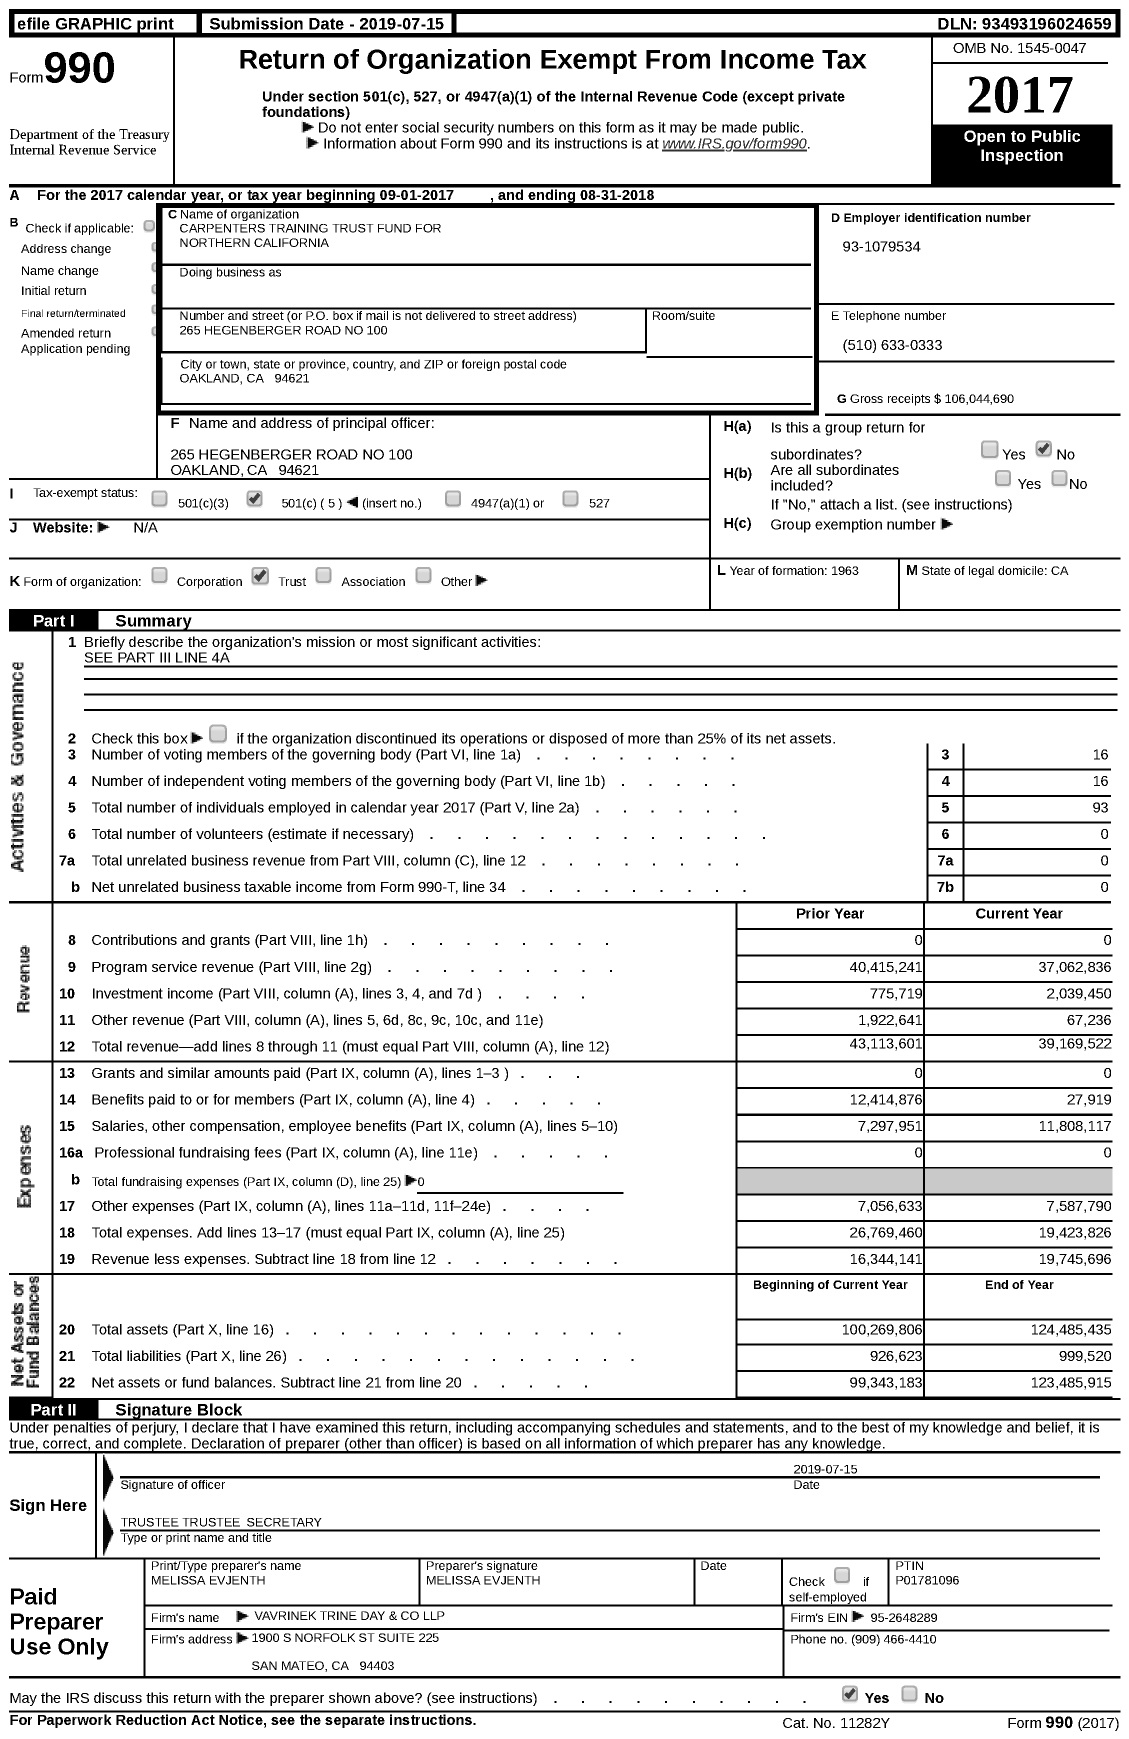 Image of first page of 2017 Form 990 for Carpenters Training Trust Fund for Northern California